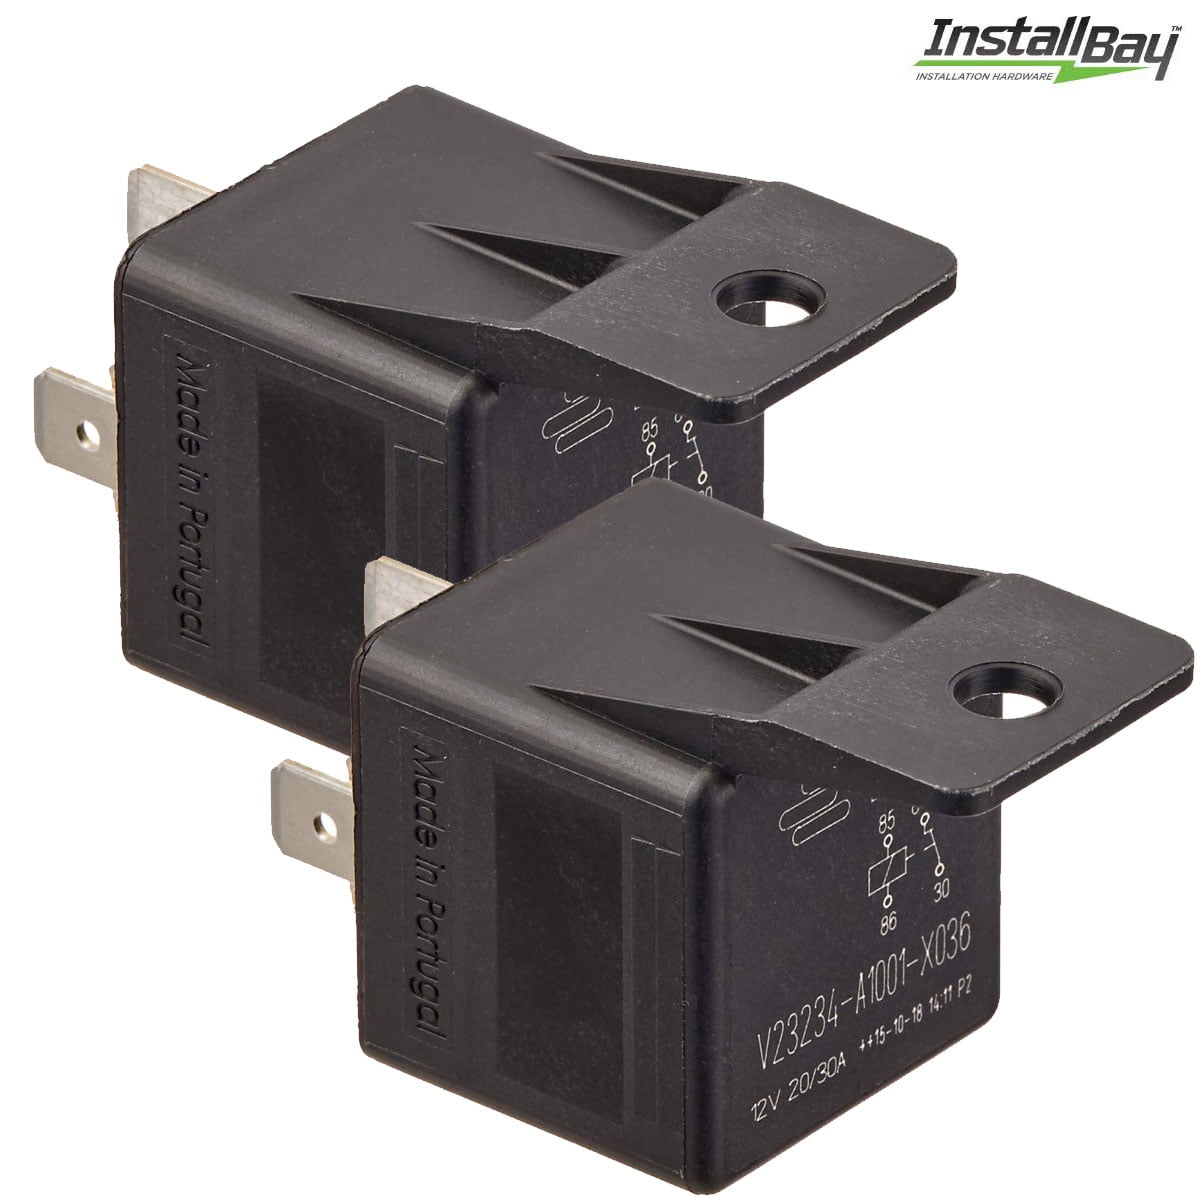 SET OF 10 12v 5pin 20/30 amp On/Off Relays automotive